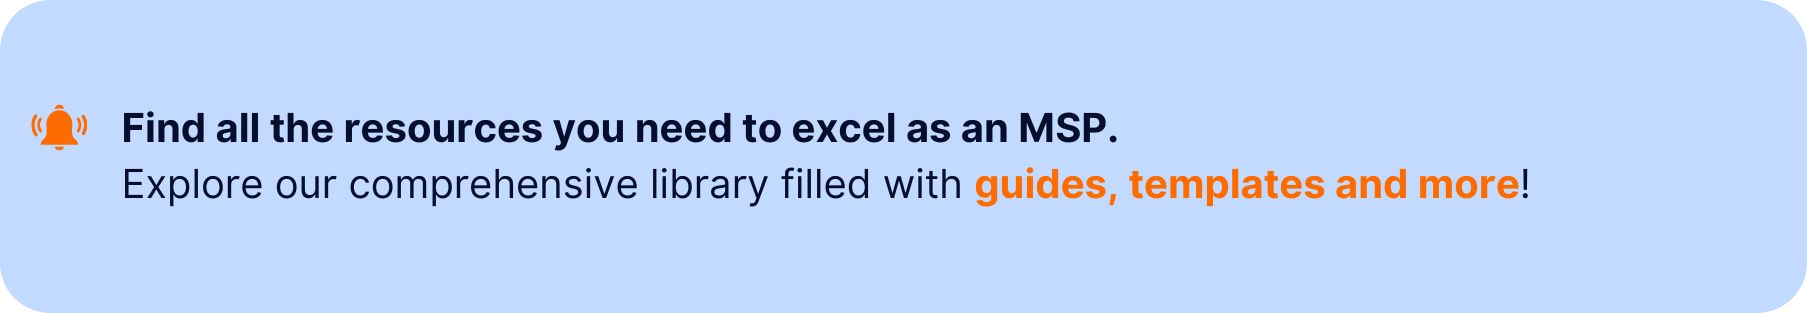 A banner with a notification icon and the text: "Find all the resources you need to excel as an MSP. Explore our comprehensive library filled with guides, templates, and more!" on a light blue background.